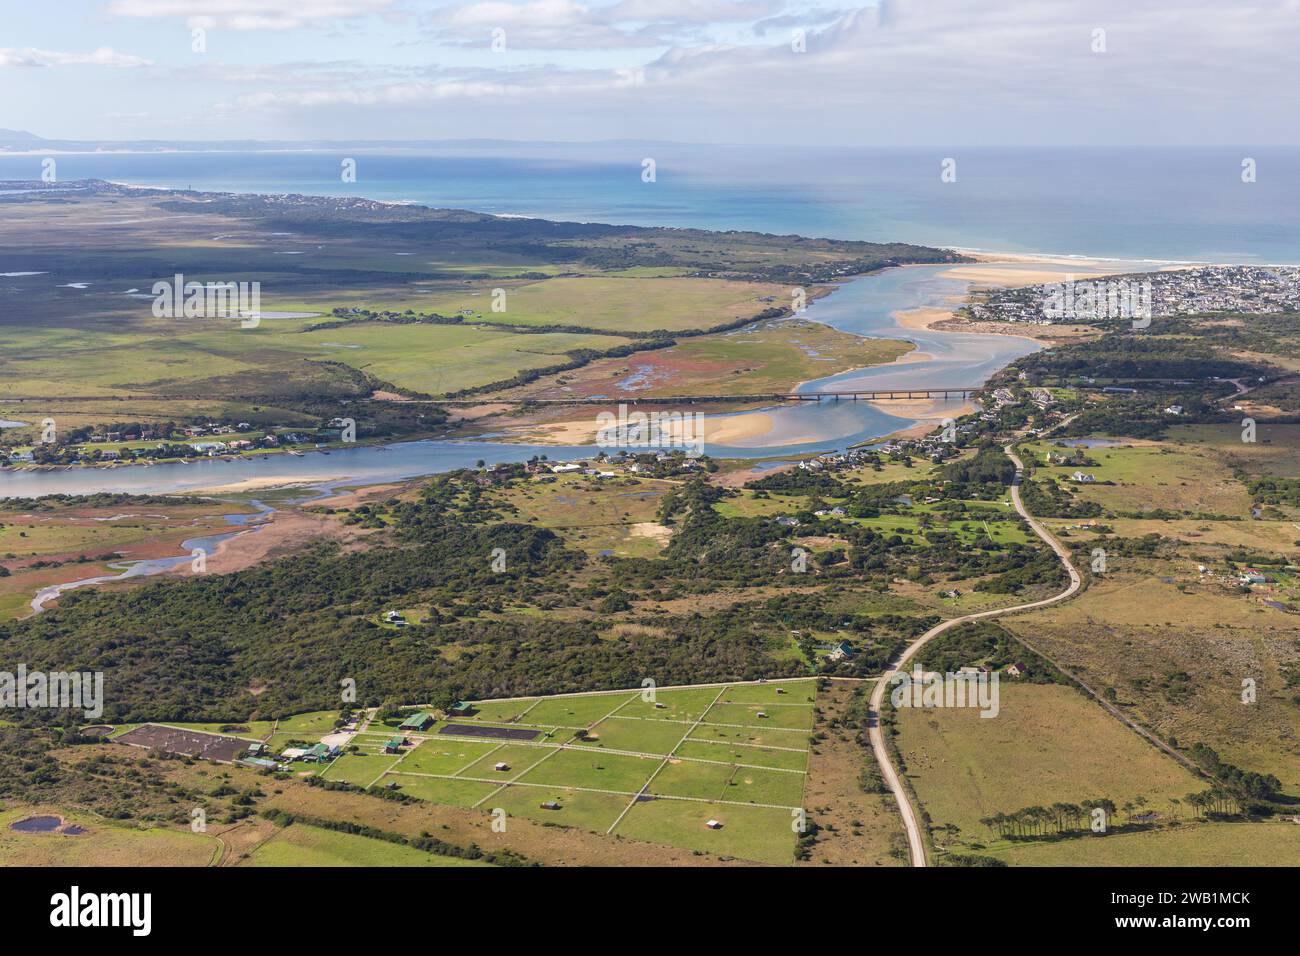 Aerial photograph of The Krom river flowing into the Indian Ocean, St Francis Bay South Africa. Stock Photo